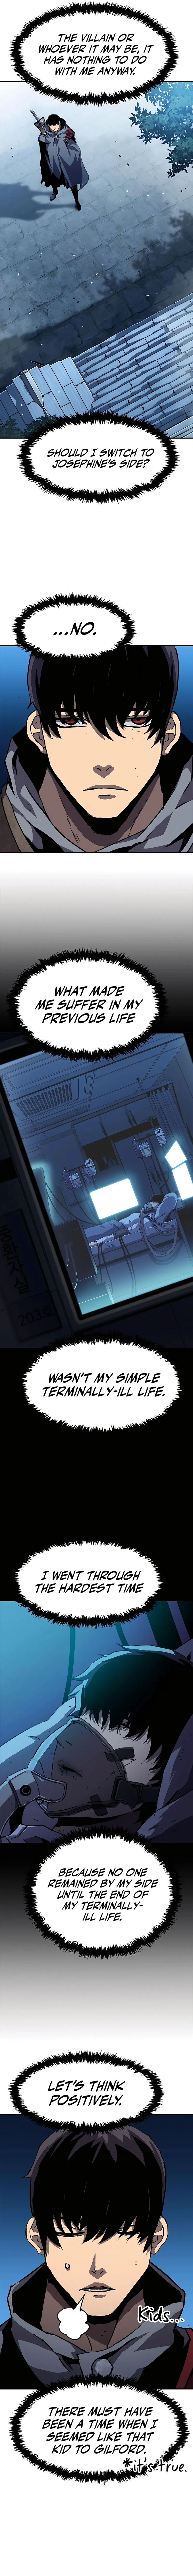 I BECAME A TERMINALLY-ILL KNIGHT Chapter 20 page 13